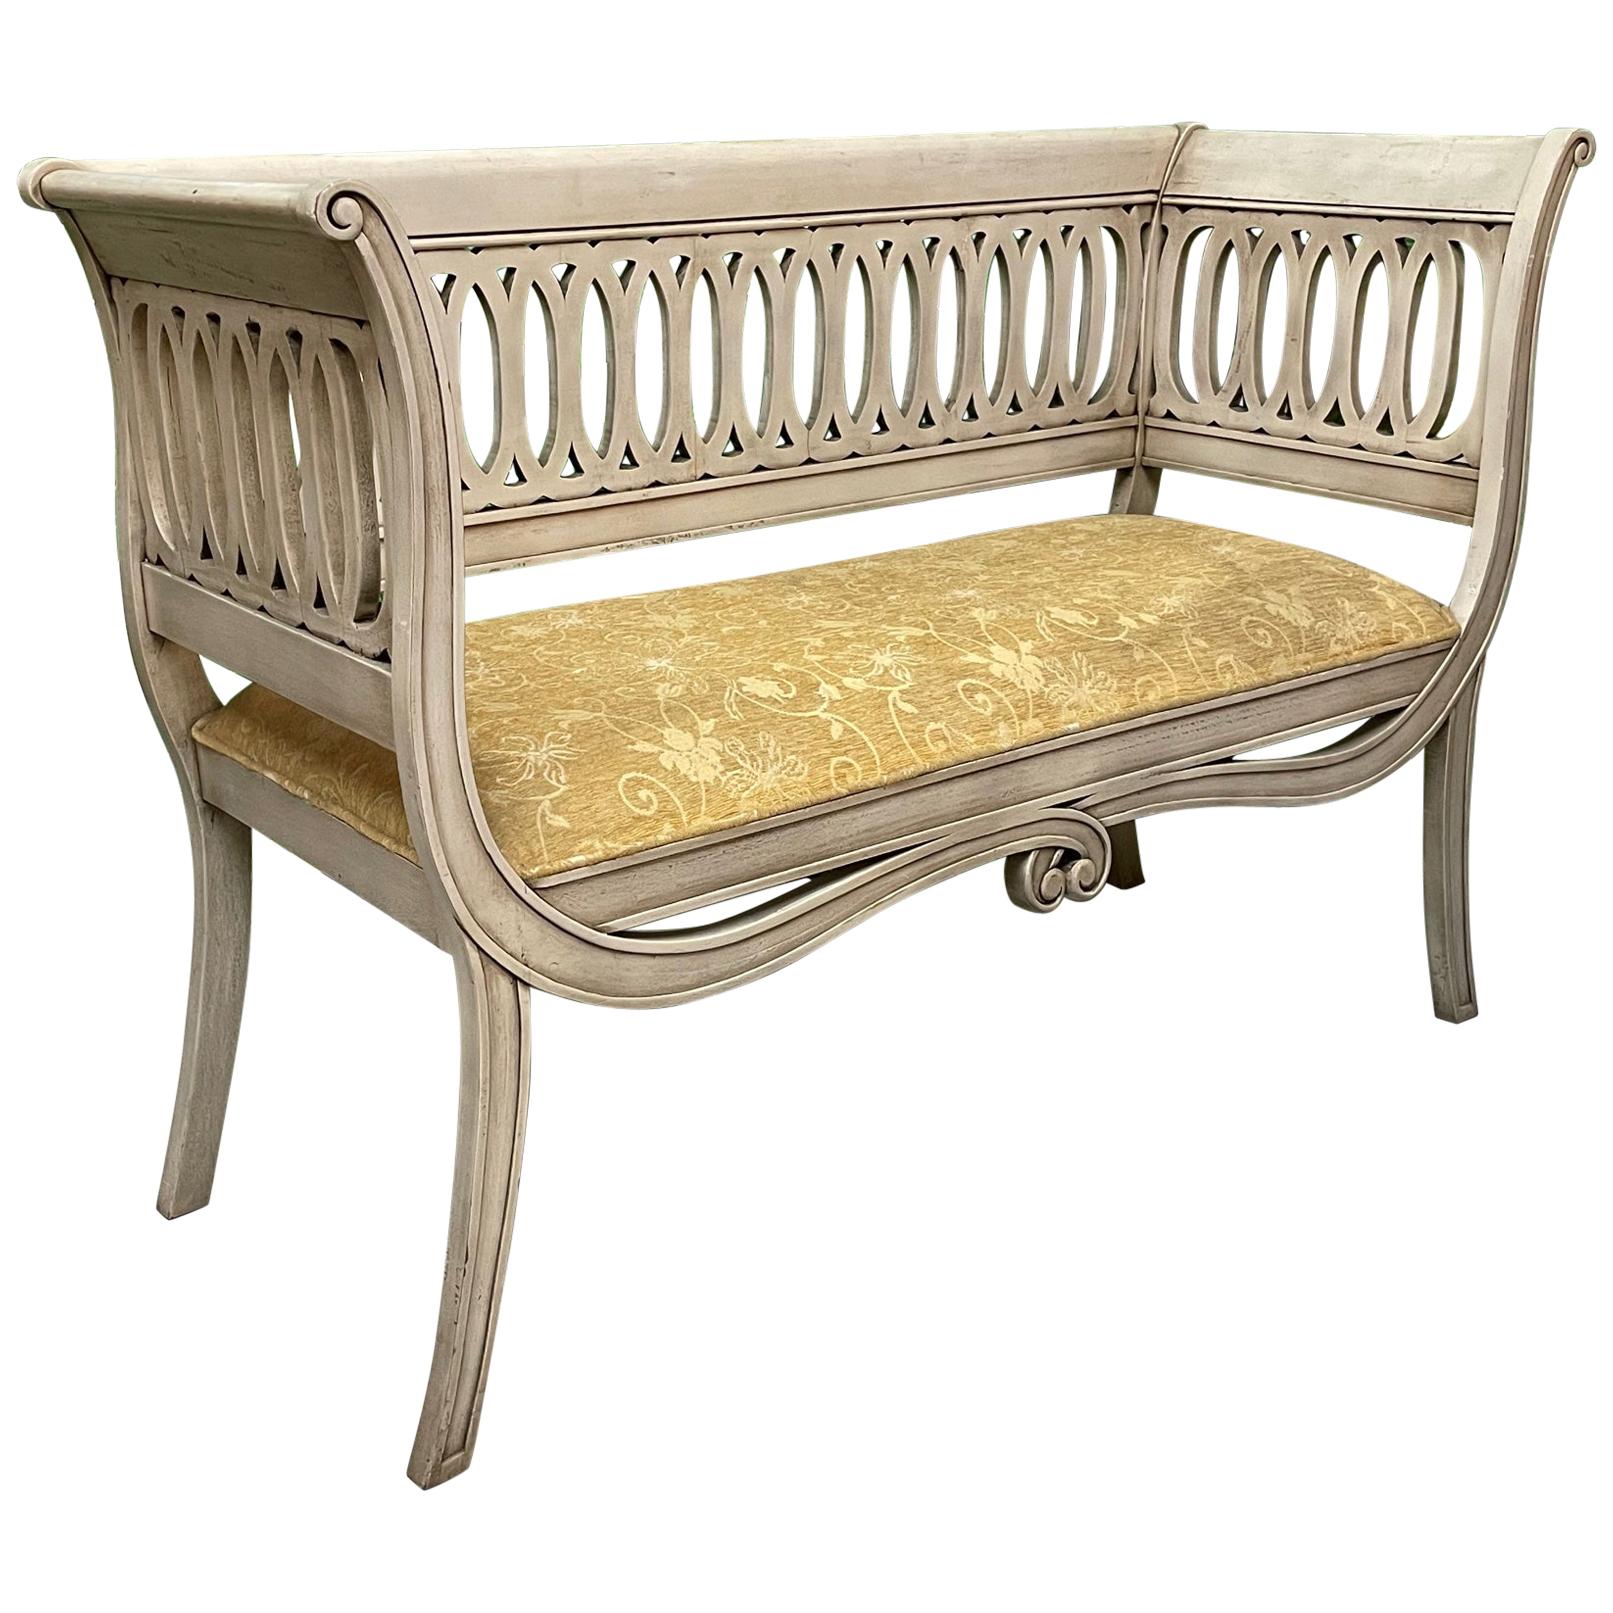 Regency style bench features a scrolled frame and sabre legs. Upholstered in a vintage tone on tone fabric. Finish appears to be original. Good condition with minor imperfections consistent with age.